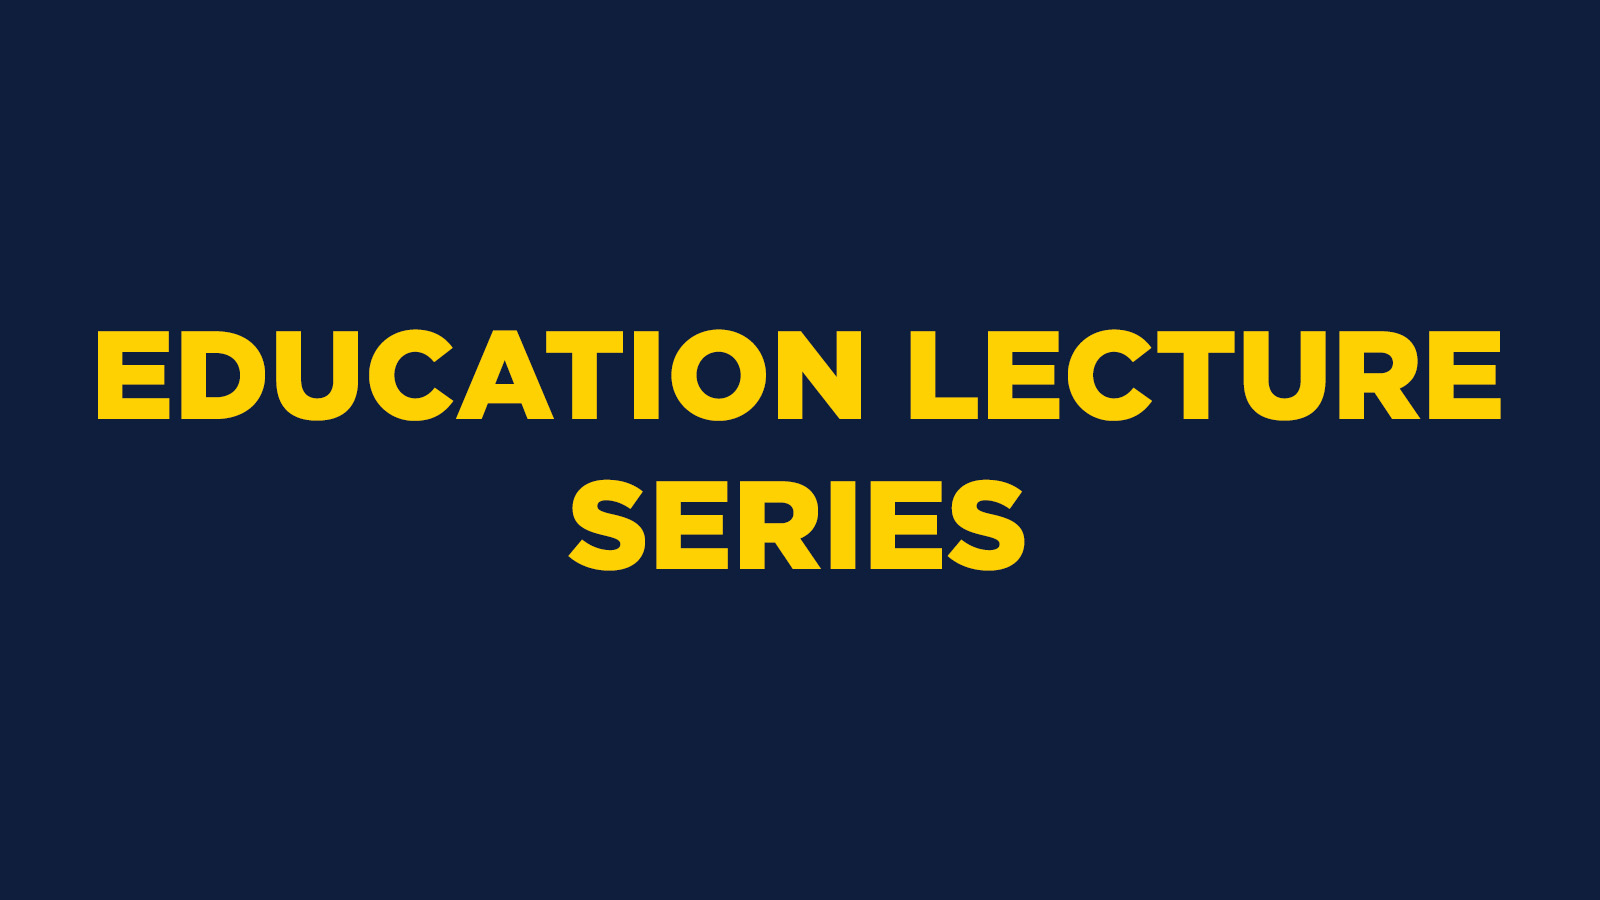 EDUCATION LECTURE SERIES